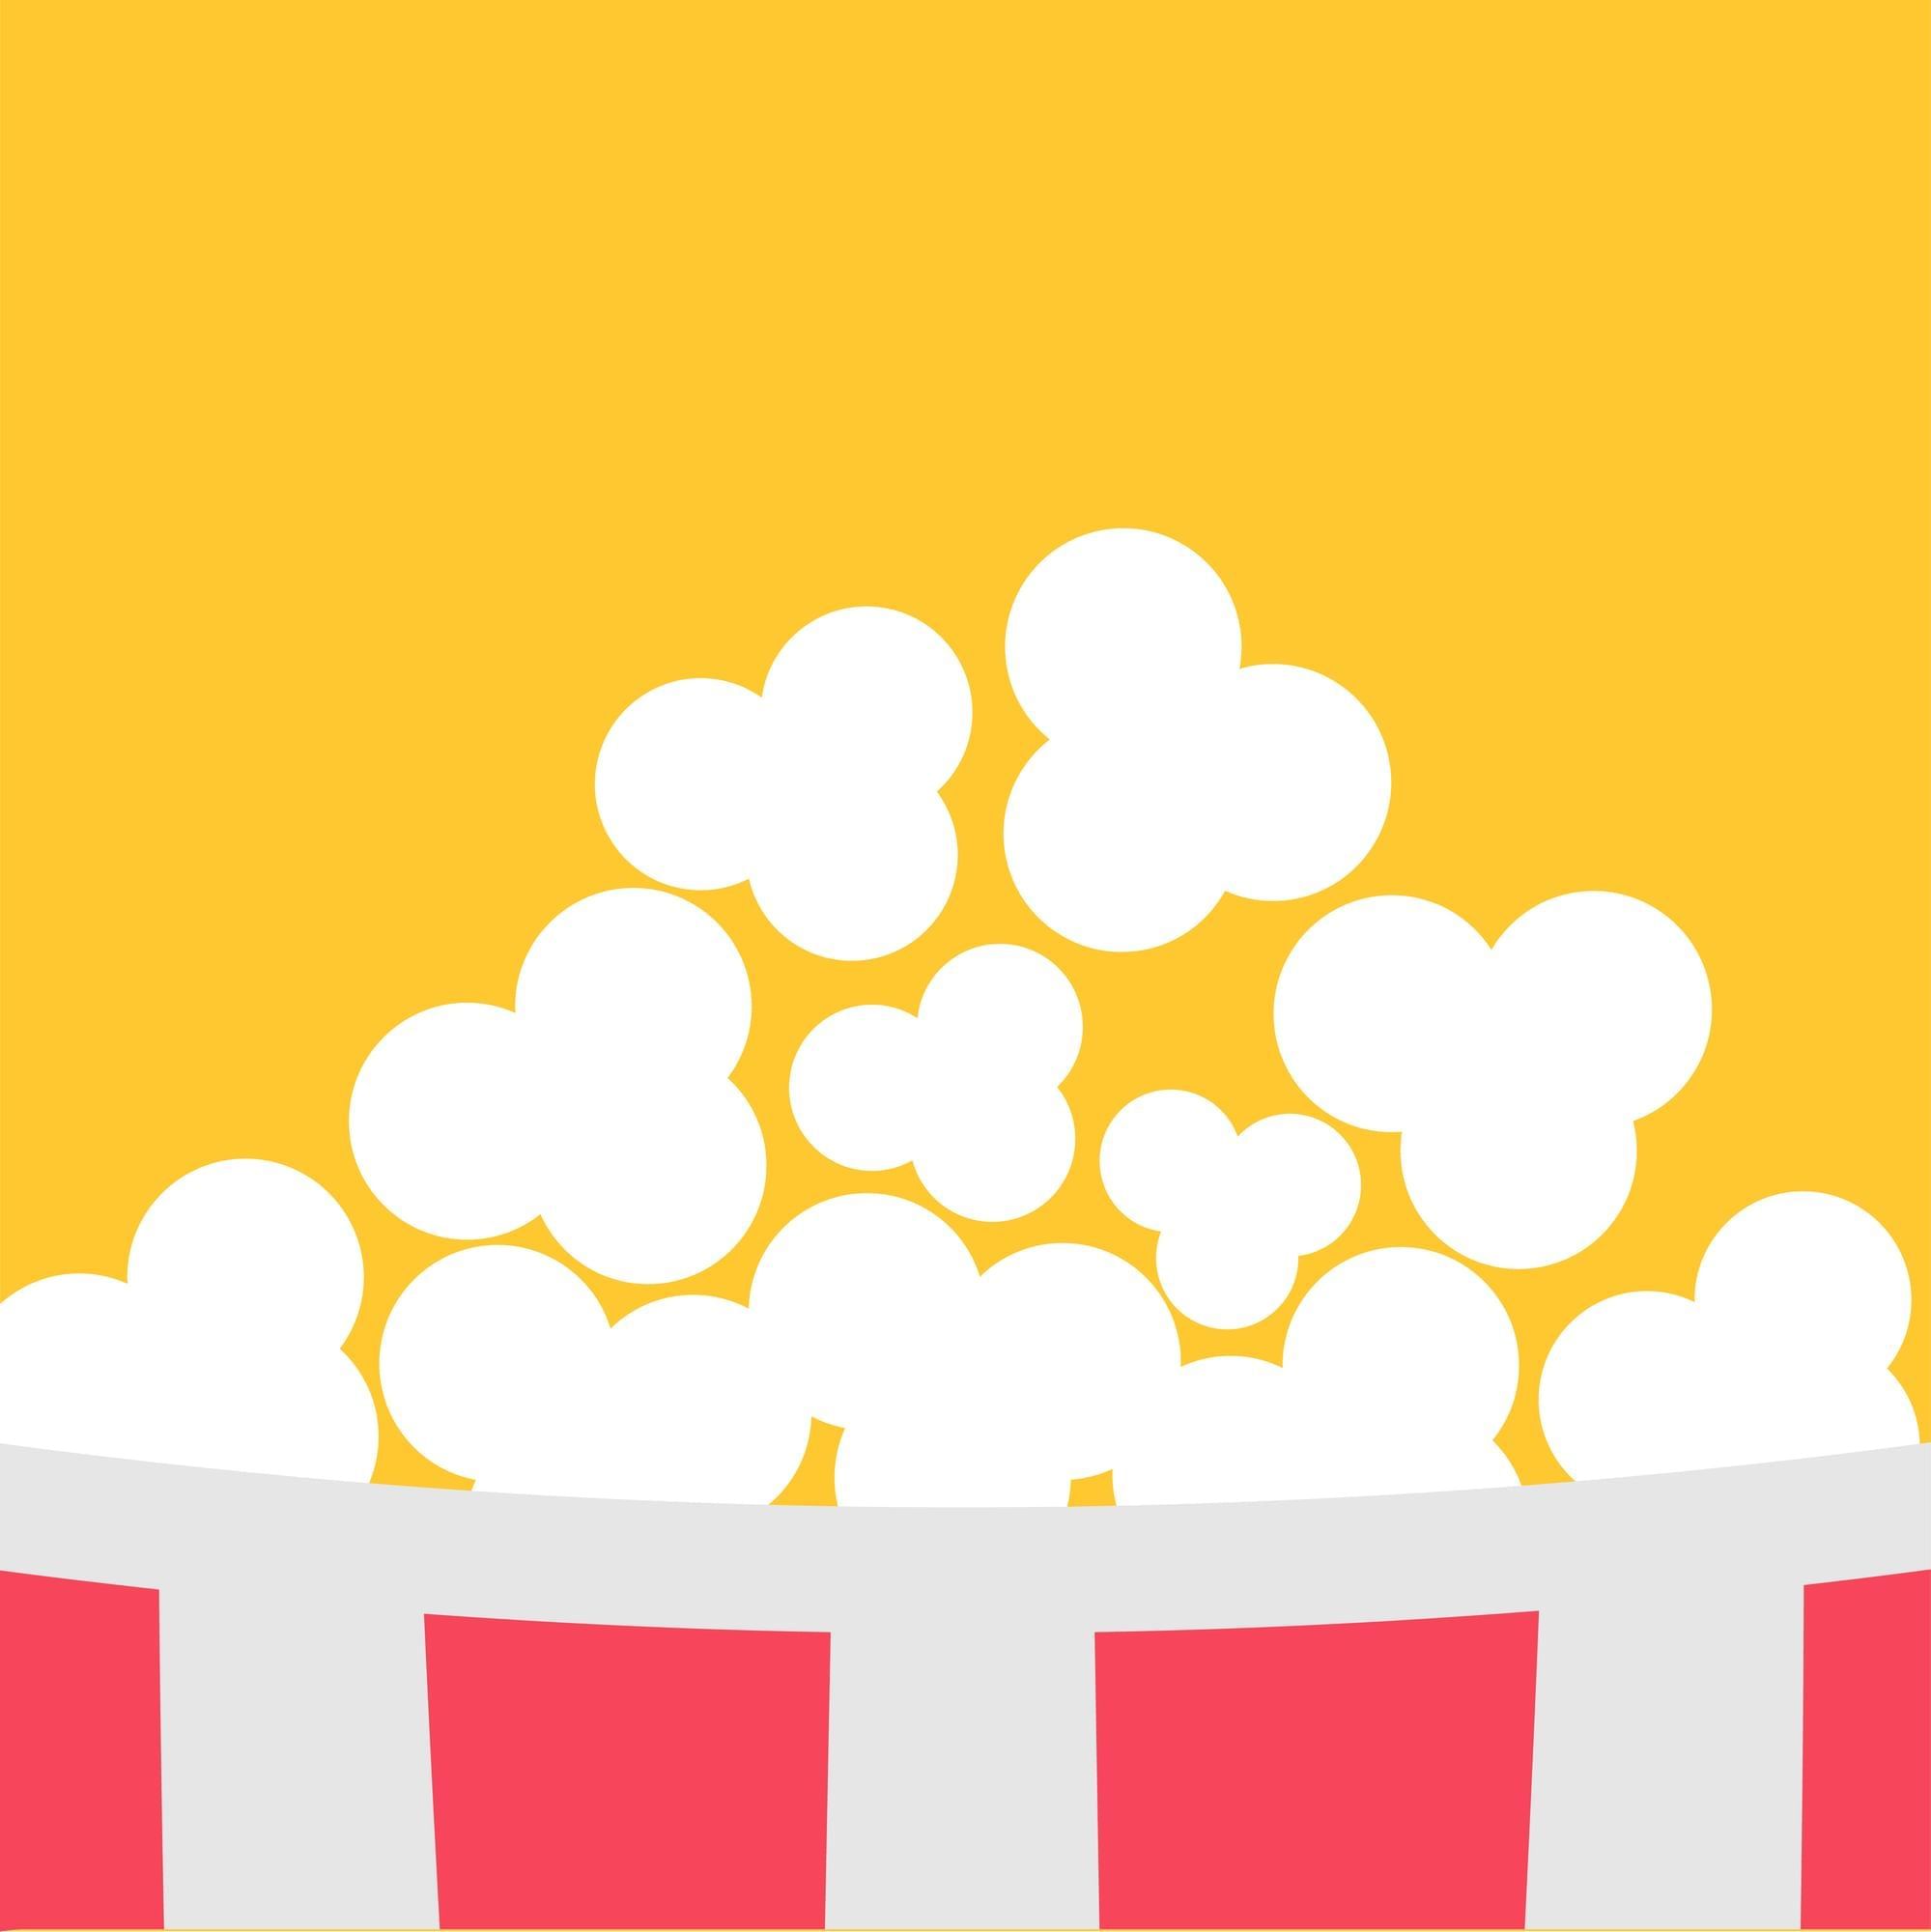 Popcorn graphic on a yellow background at The Grove Hotel